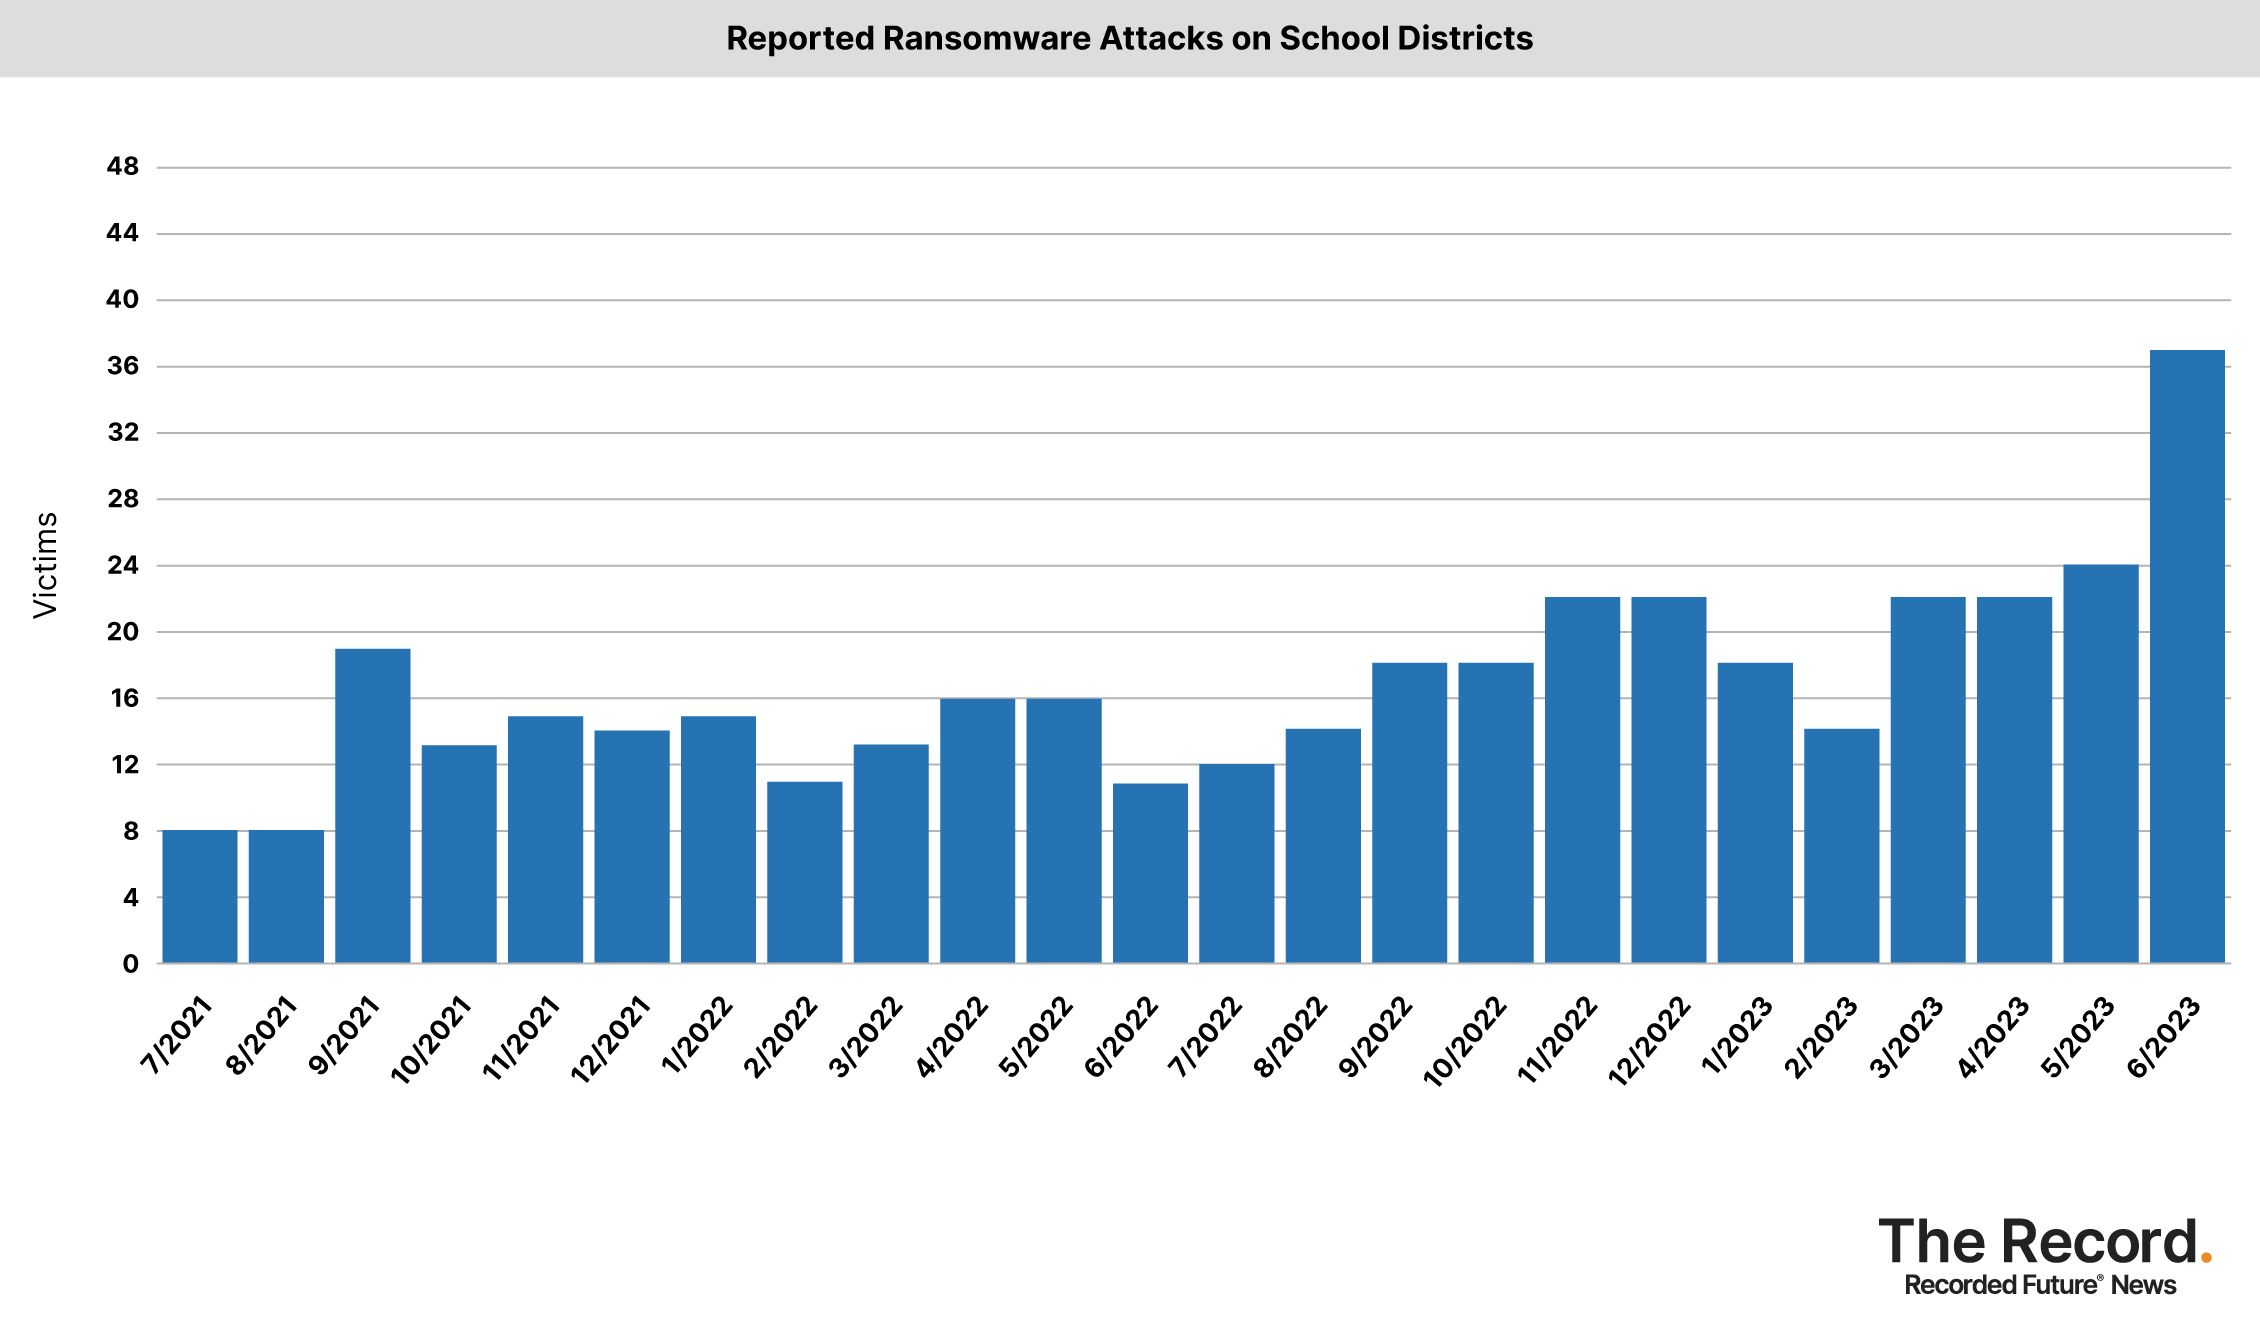 2023_0706 - Ransomware Tracker - Reported Ransomware Attacks on School Districts (1).jpg